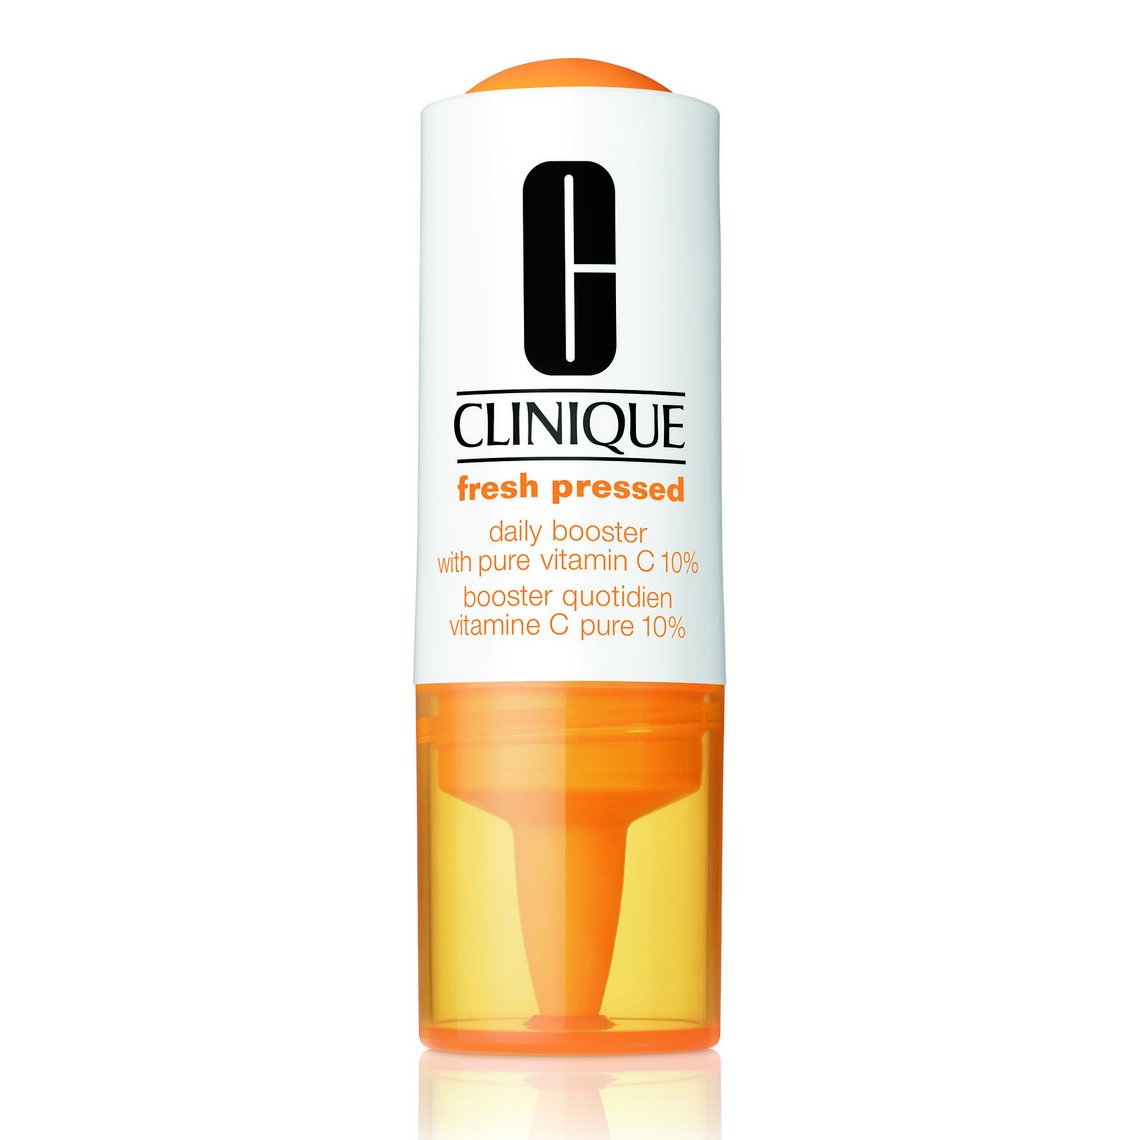 Fresh Pressed Daily Booster with Pure Vitamin C 10%: Clinique